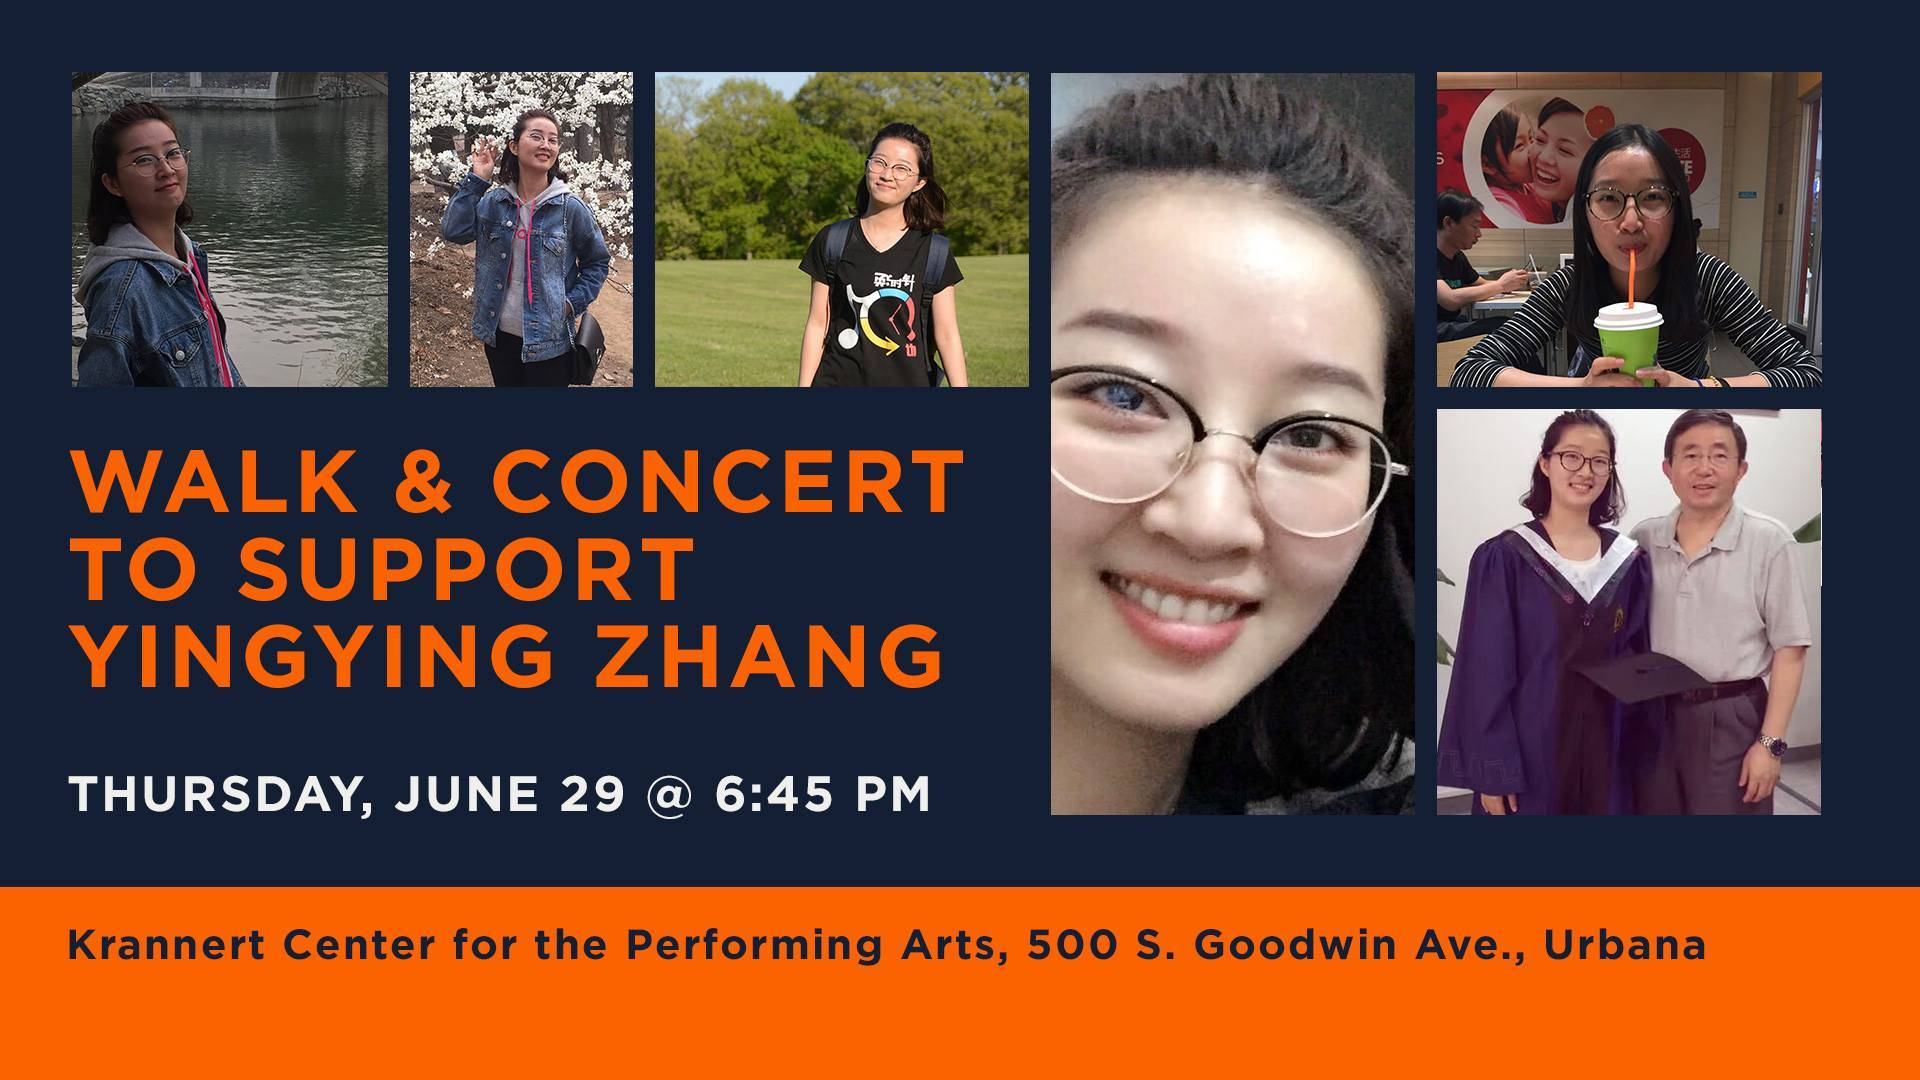 Walk and Concert to Support Yingying Zhang taking place tomorrow night